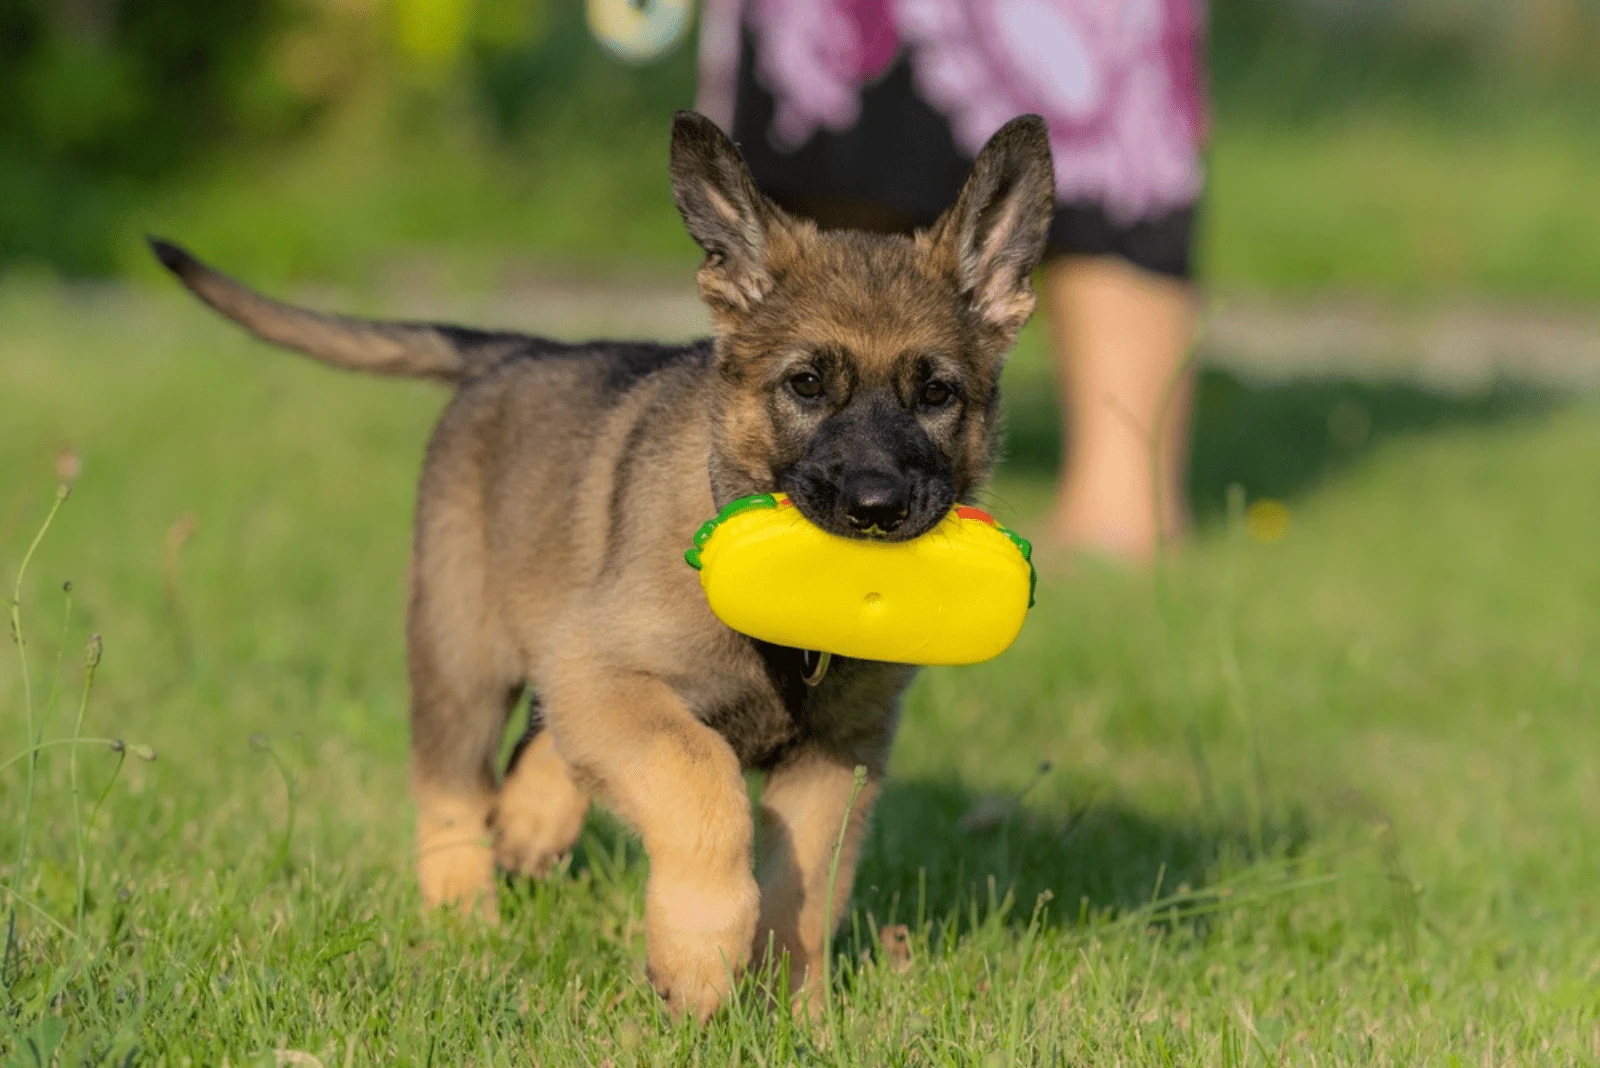 Sable German Shepherd runs across the field with a toy in its mouth